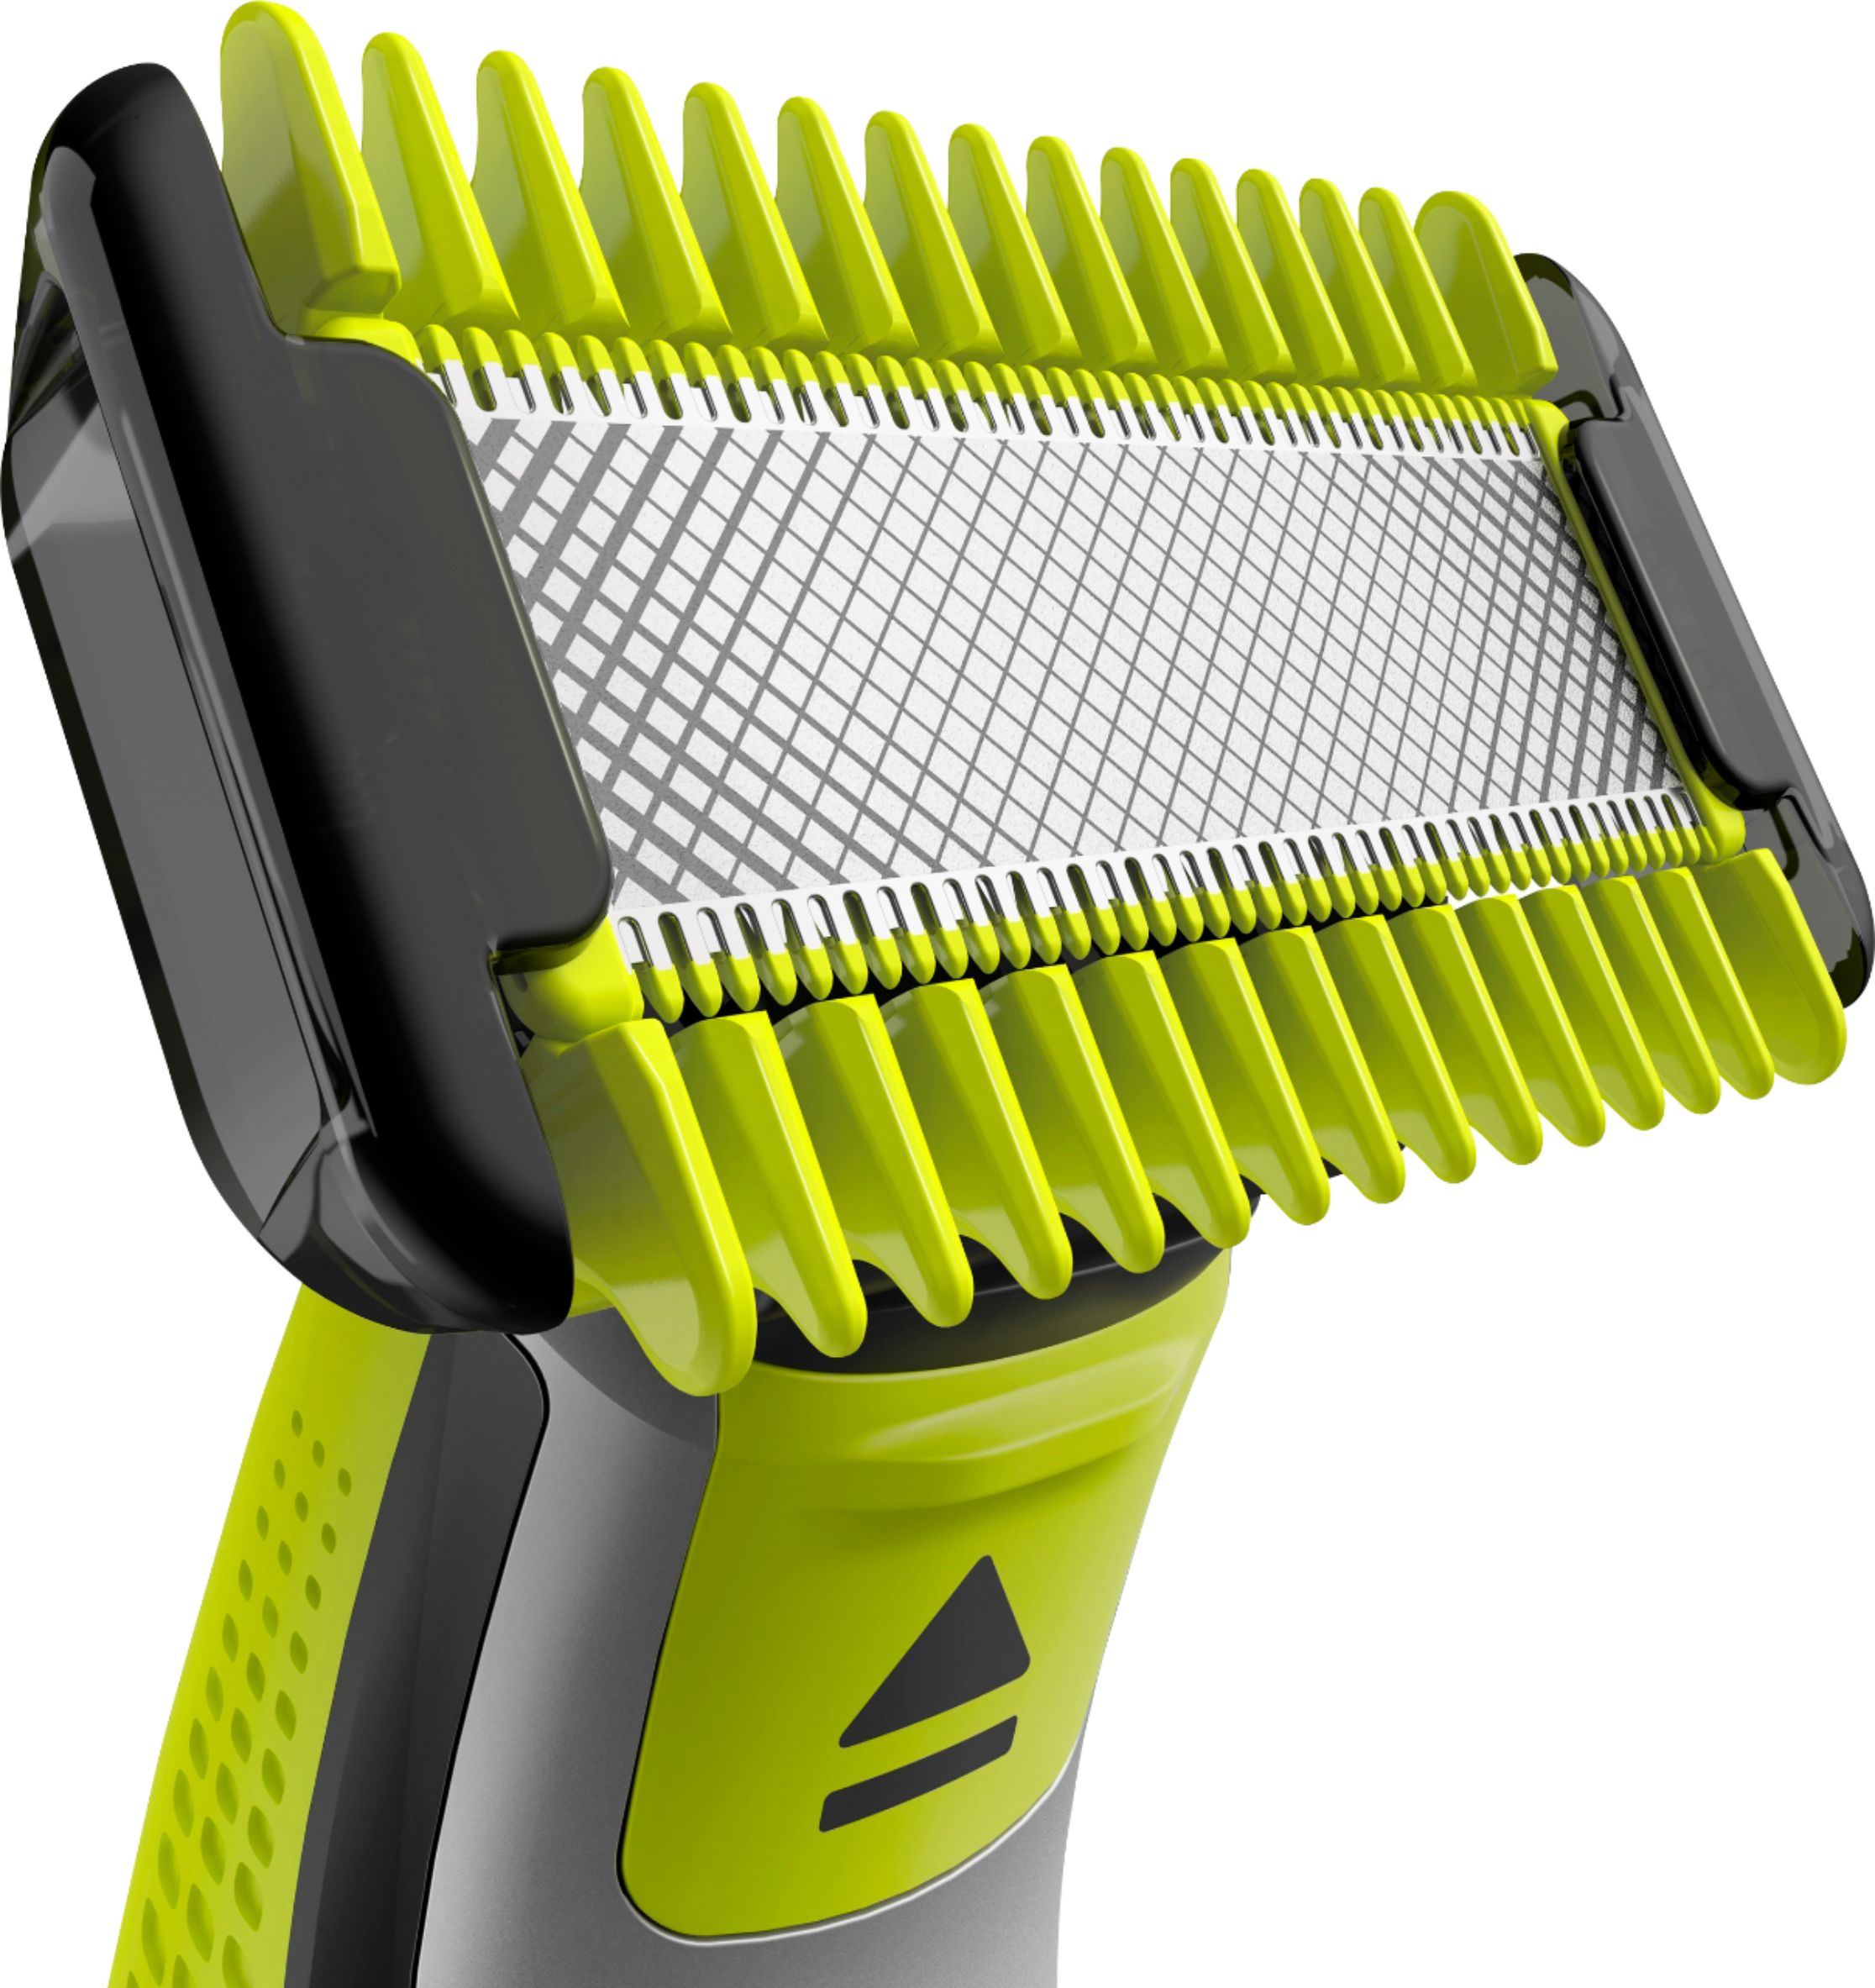 Left View: Panasonic V-Shaped Body Hair Trimmer with 3 Comb Attachments, Waterproof, Rechargeable - ER-GK60-S